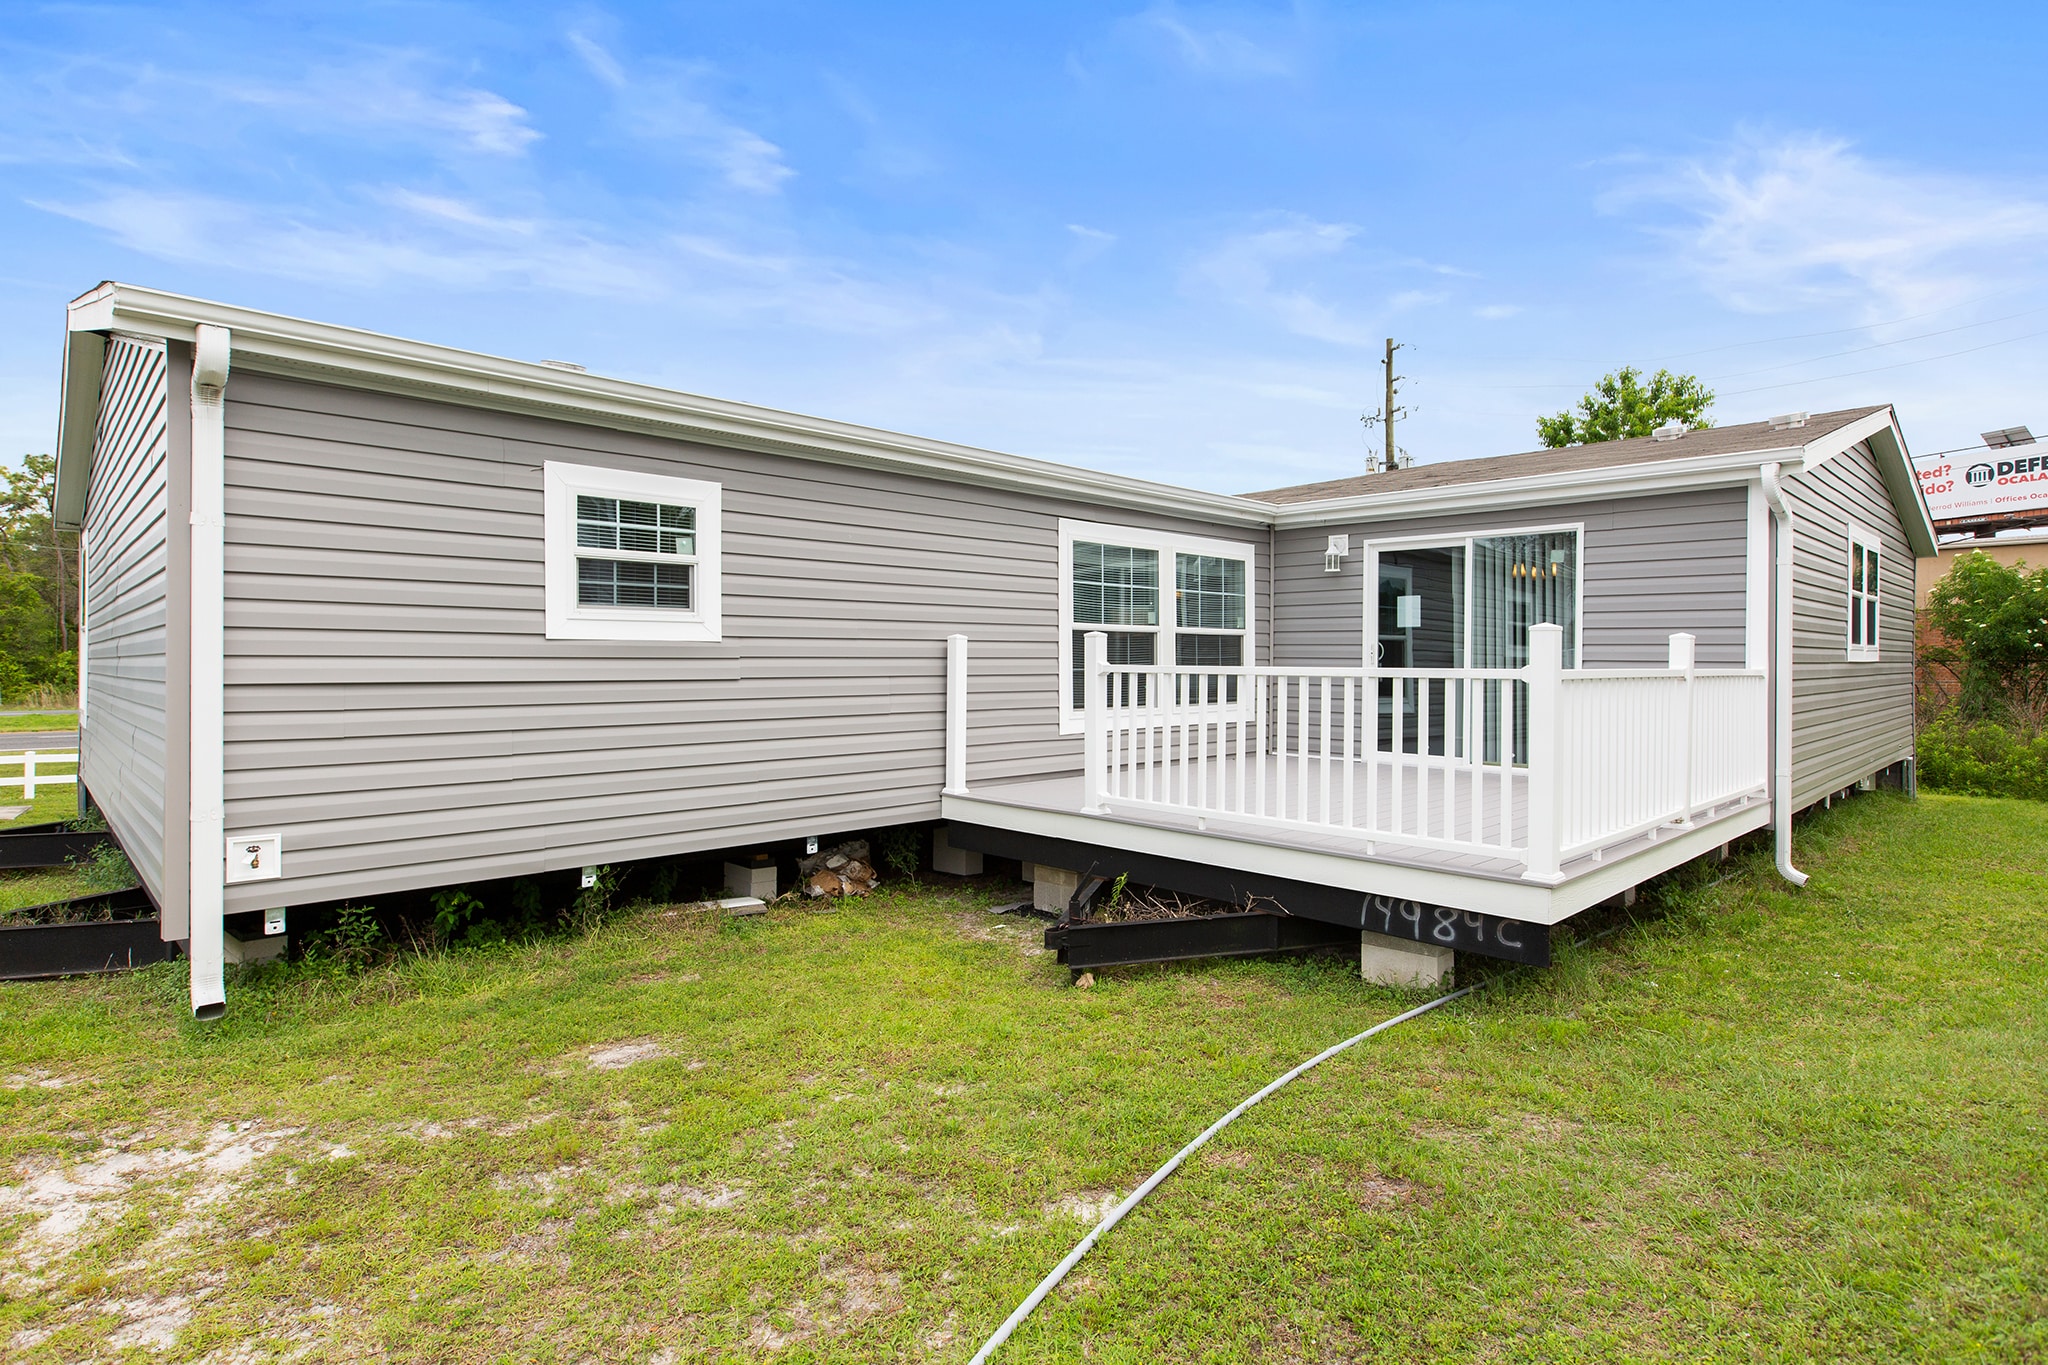 Is it smart to invest in mobile homes?